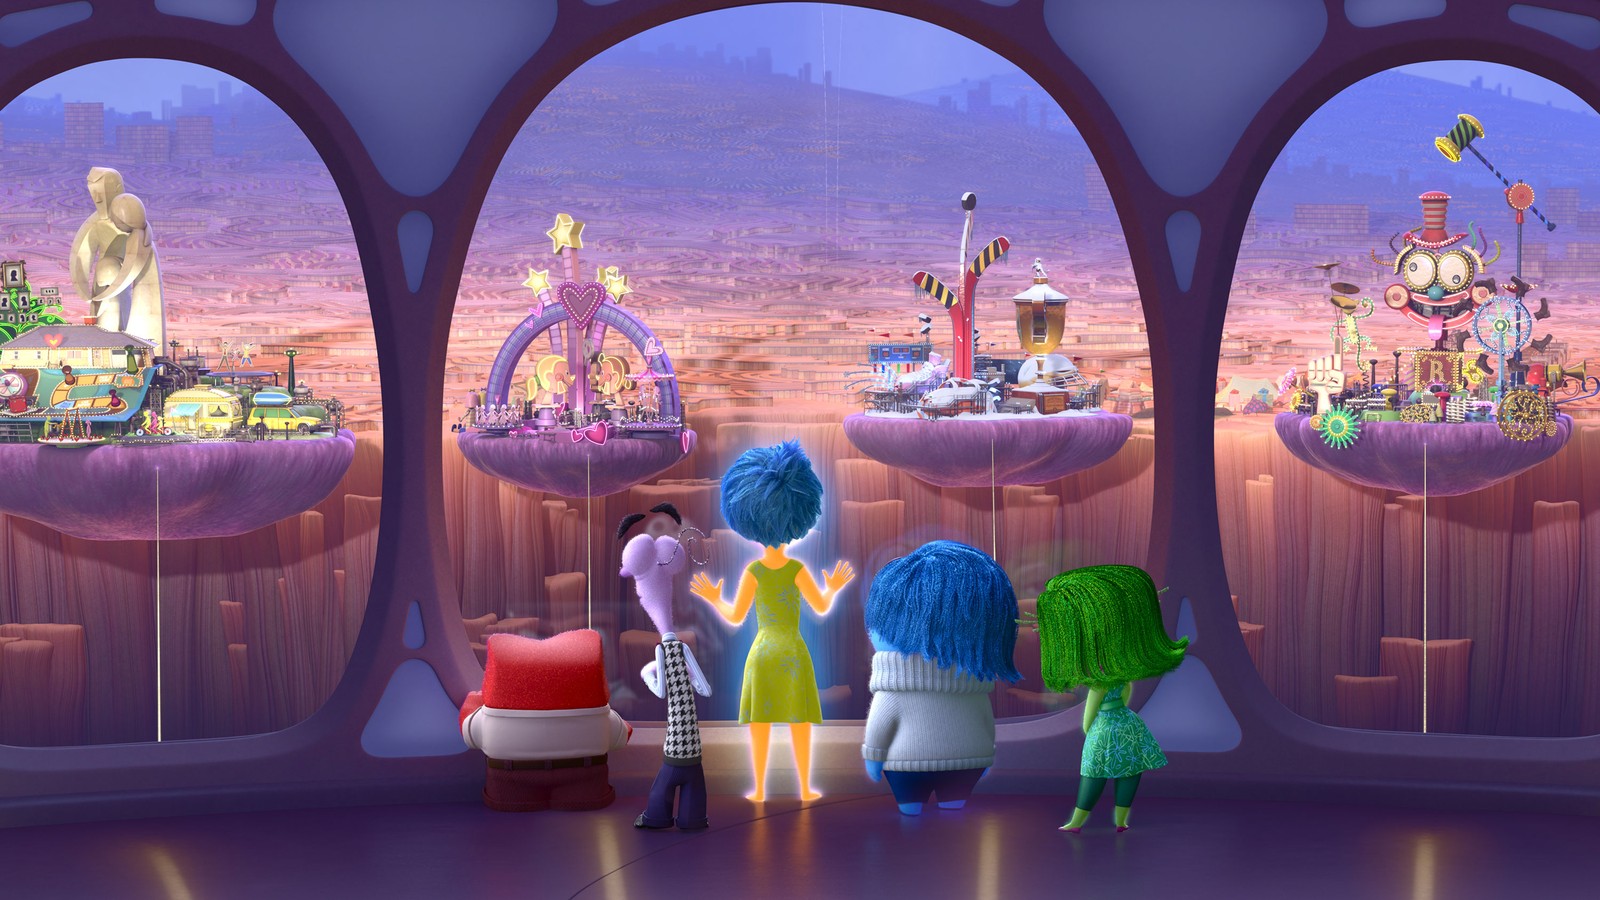 Movie Review: 'Pixar' Returns to 'Toy Story' Form With 'Inside Out